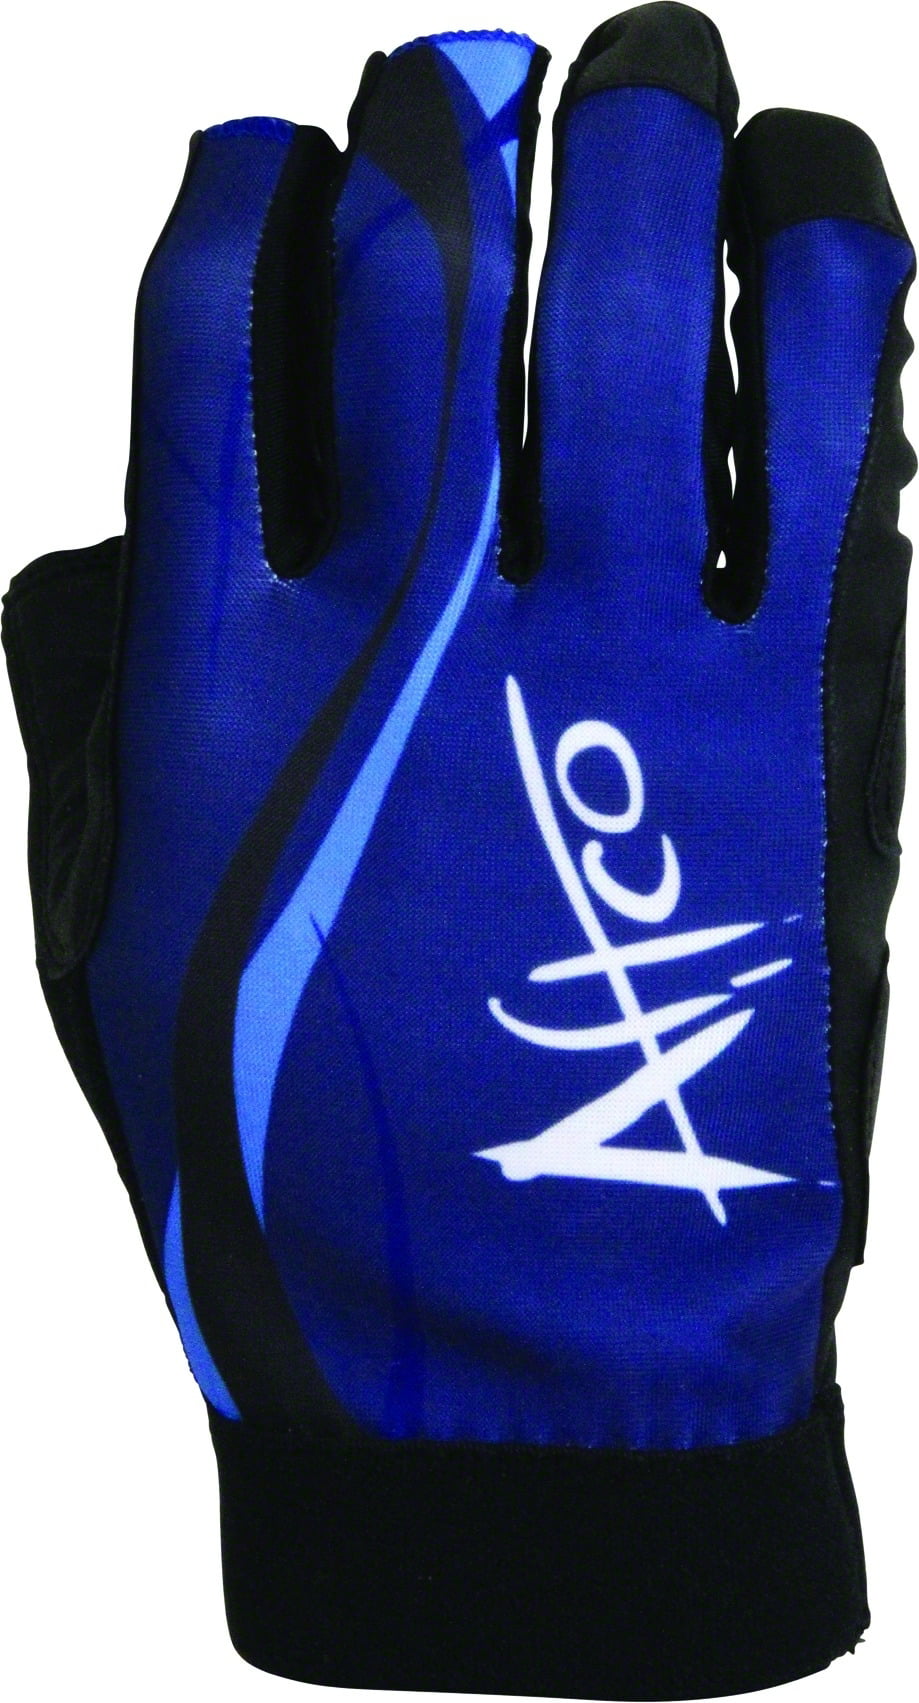 Free Shipping AFTCO Solmar UV Sun Protection Fishing Glove Pick Your Size 